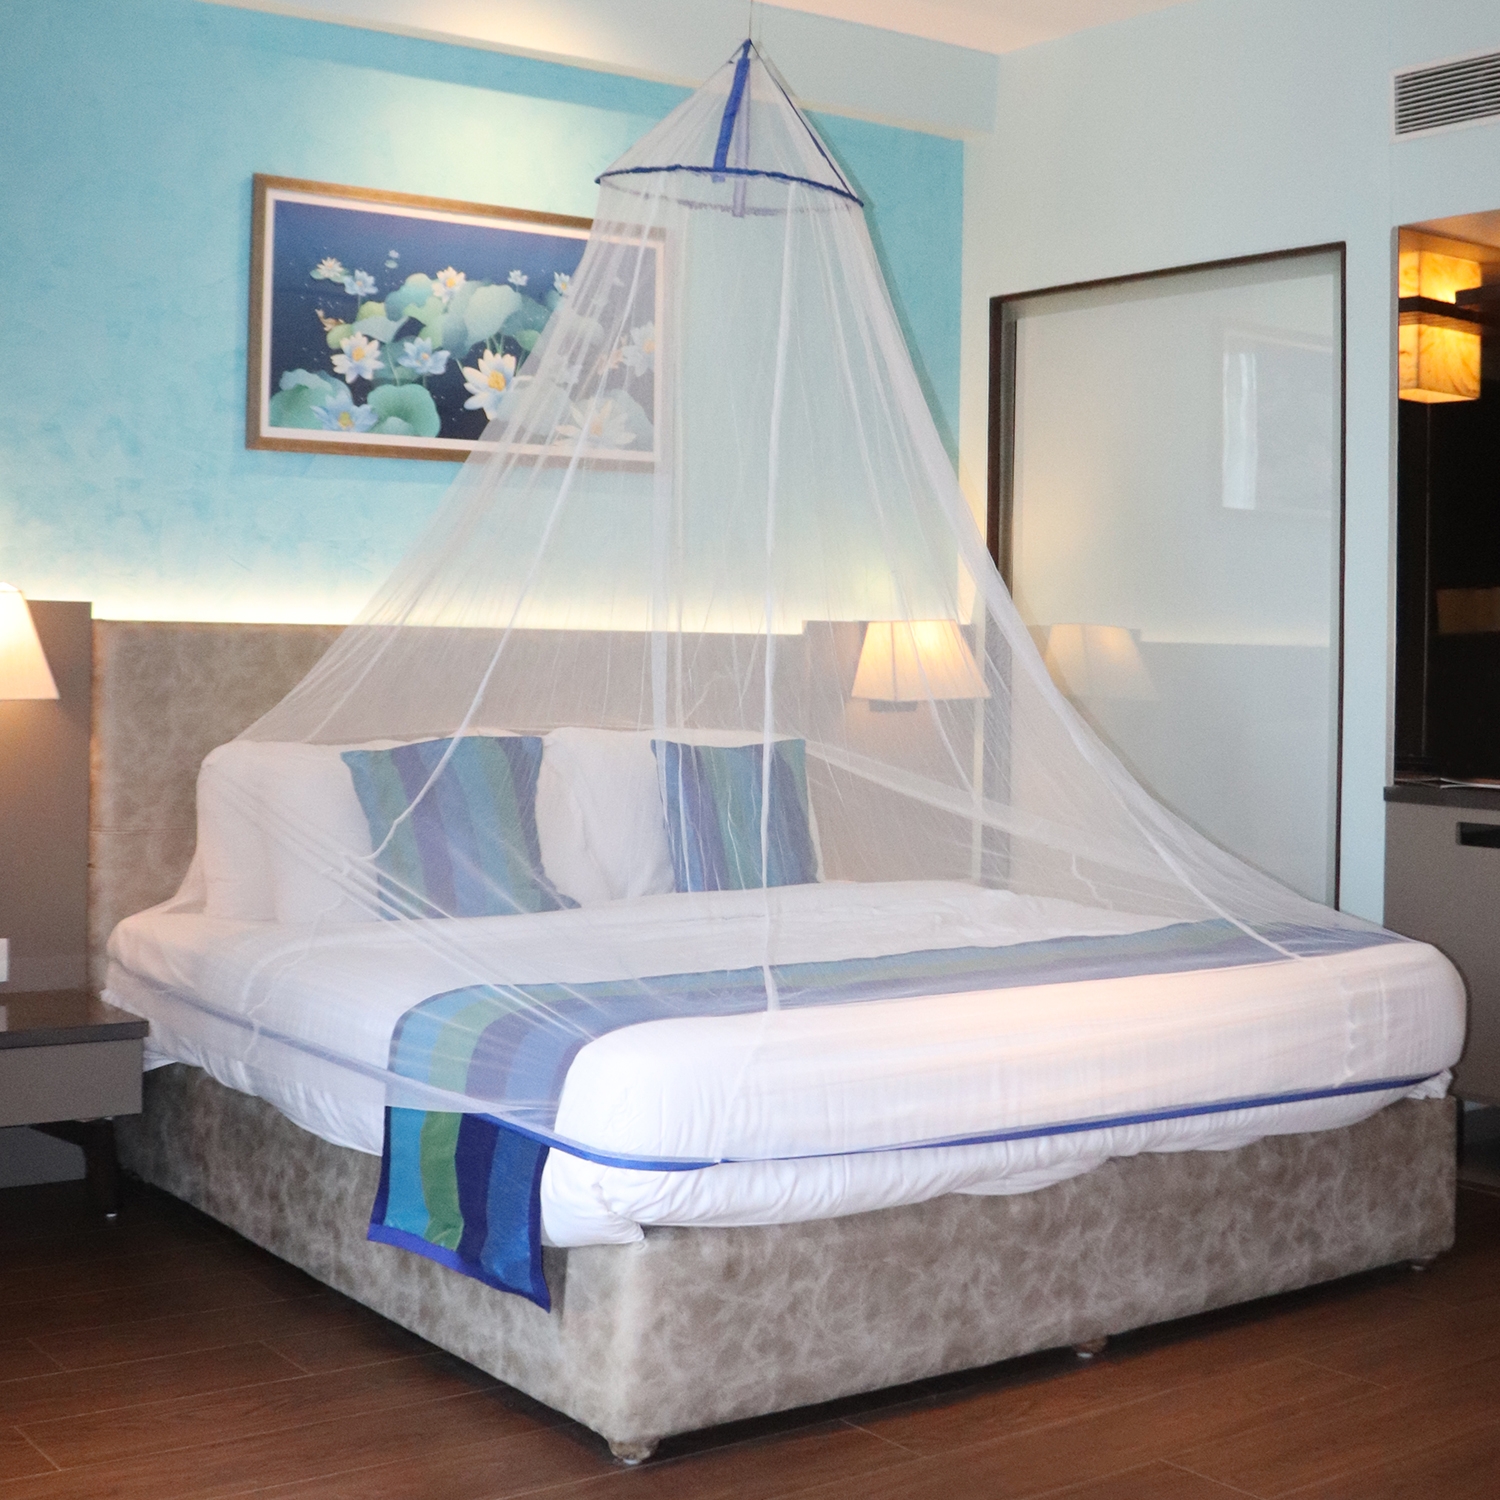 SILVER SHINE | Mosquito Net for Double Bed, King-Size, Round Ceiling Hanging Foldable Polyester Net White And Blue 4